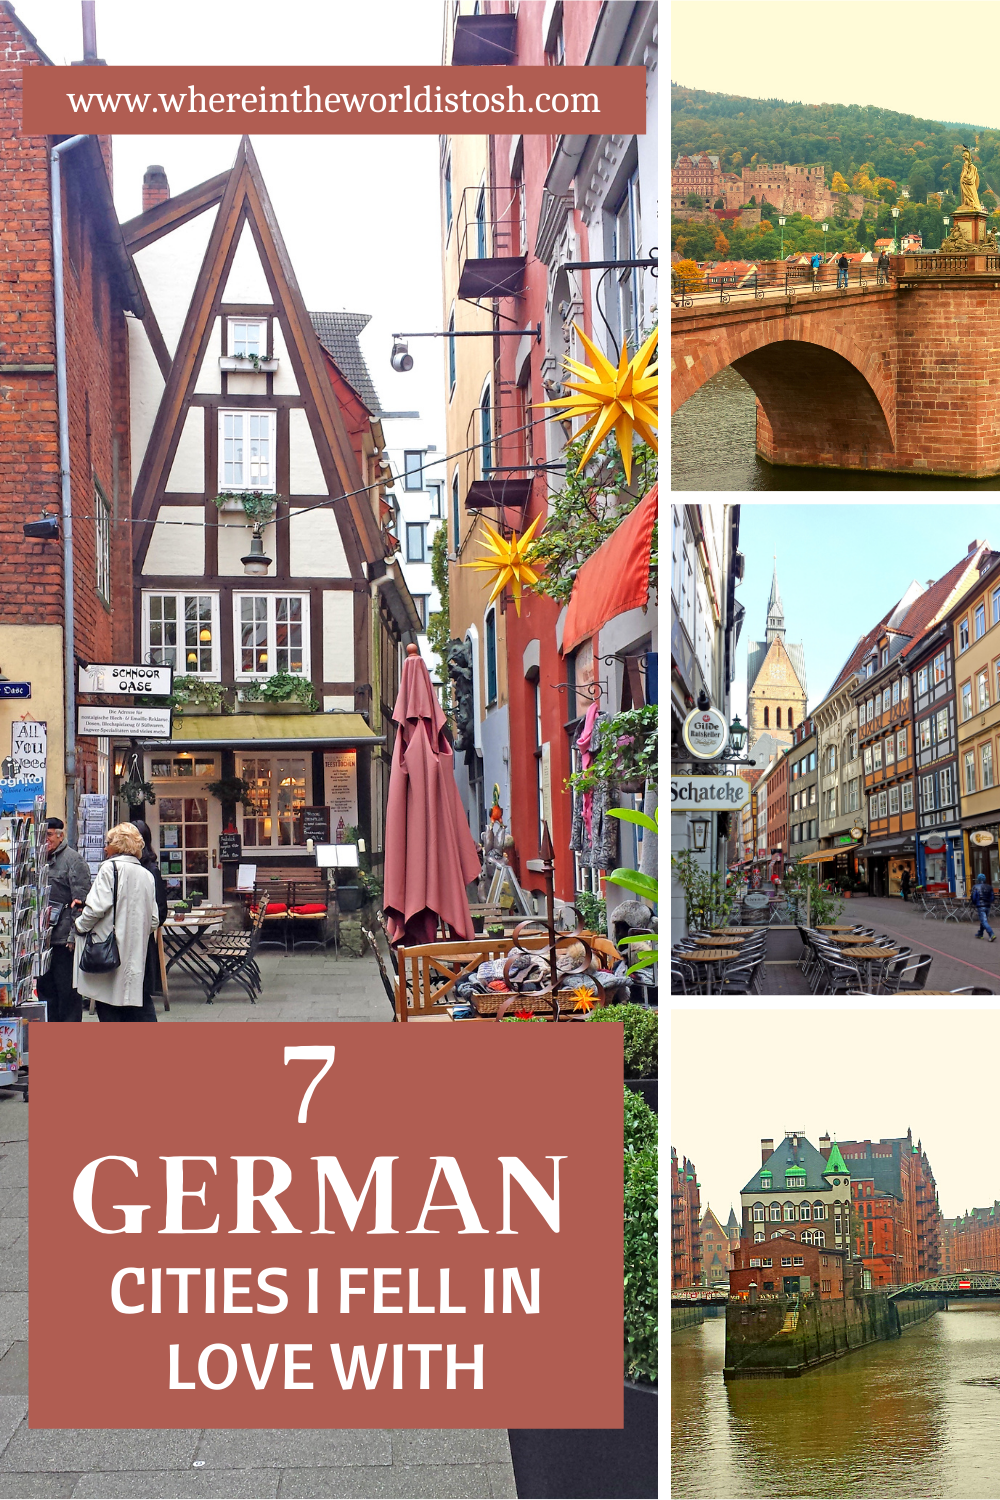 7 German Cities I fell in Love With